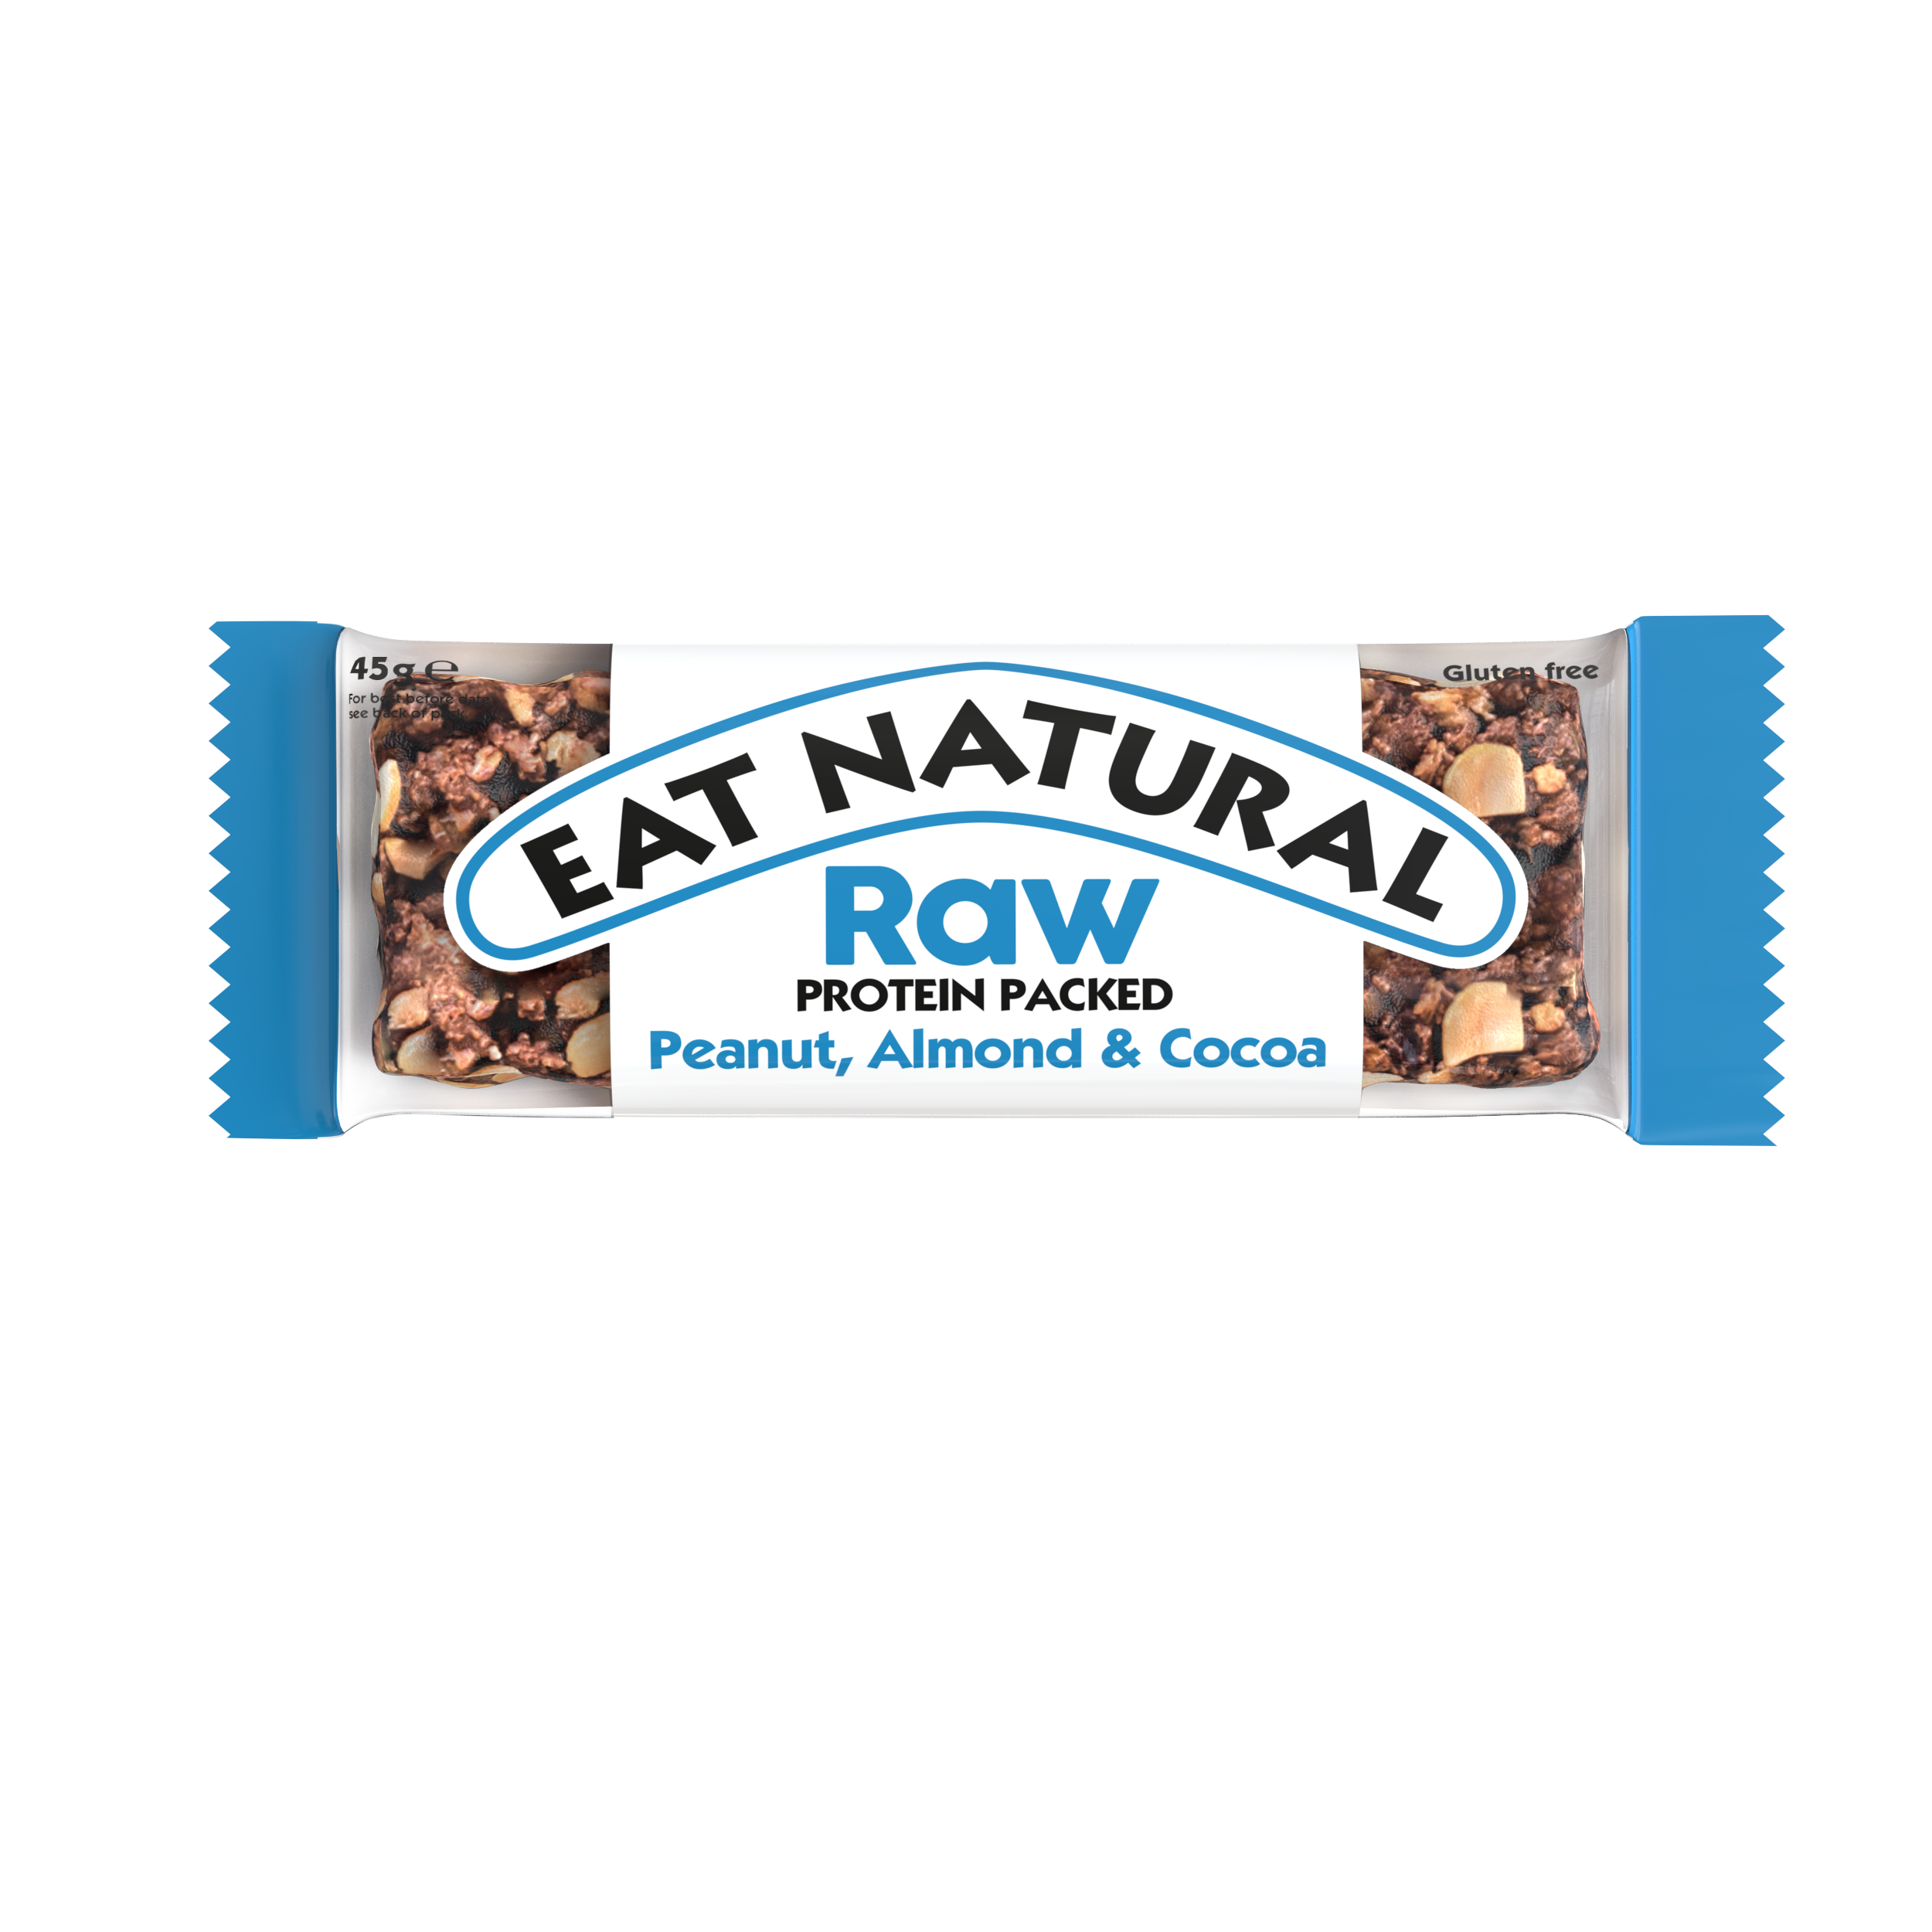 Eat Natural launches new raw range